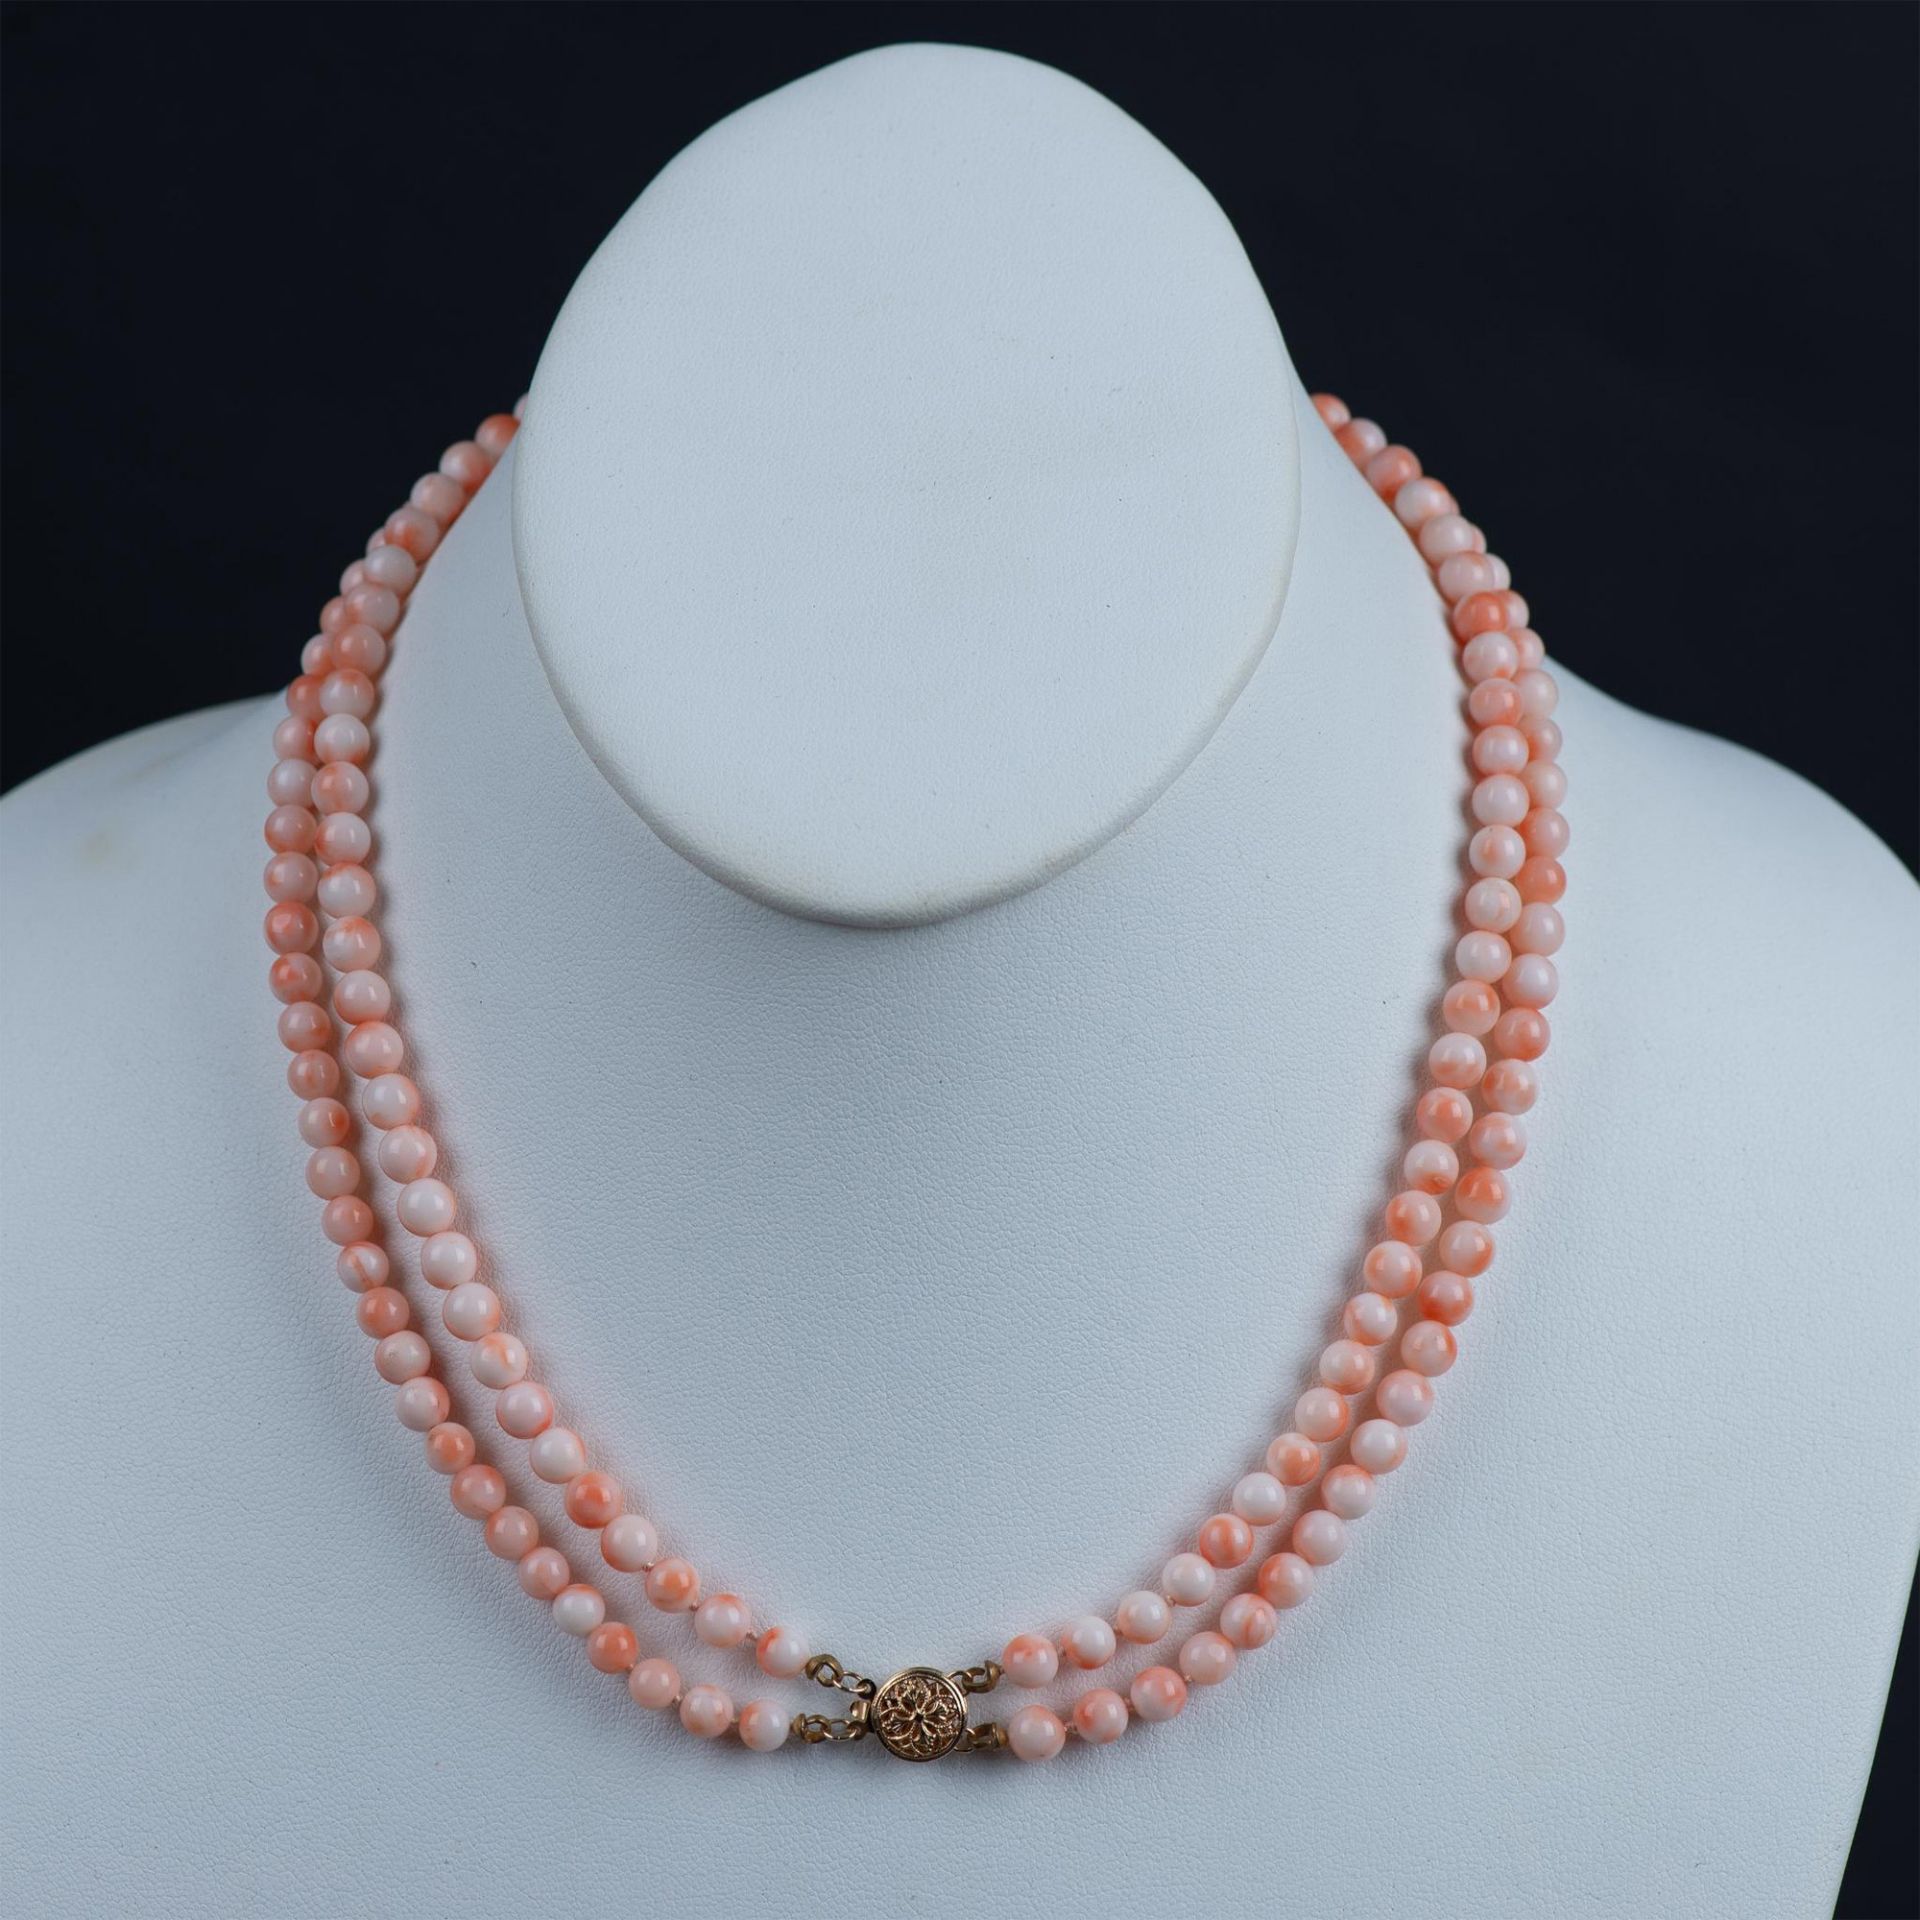 Beautiful 14K Gold Double Strand Coral Bead Necklace - Image 2 of 3